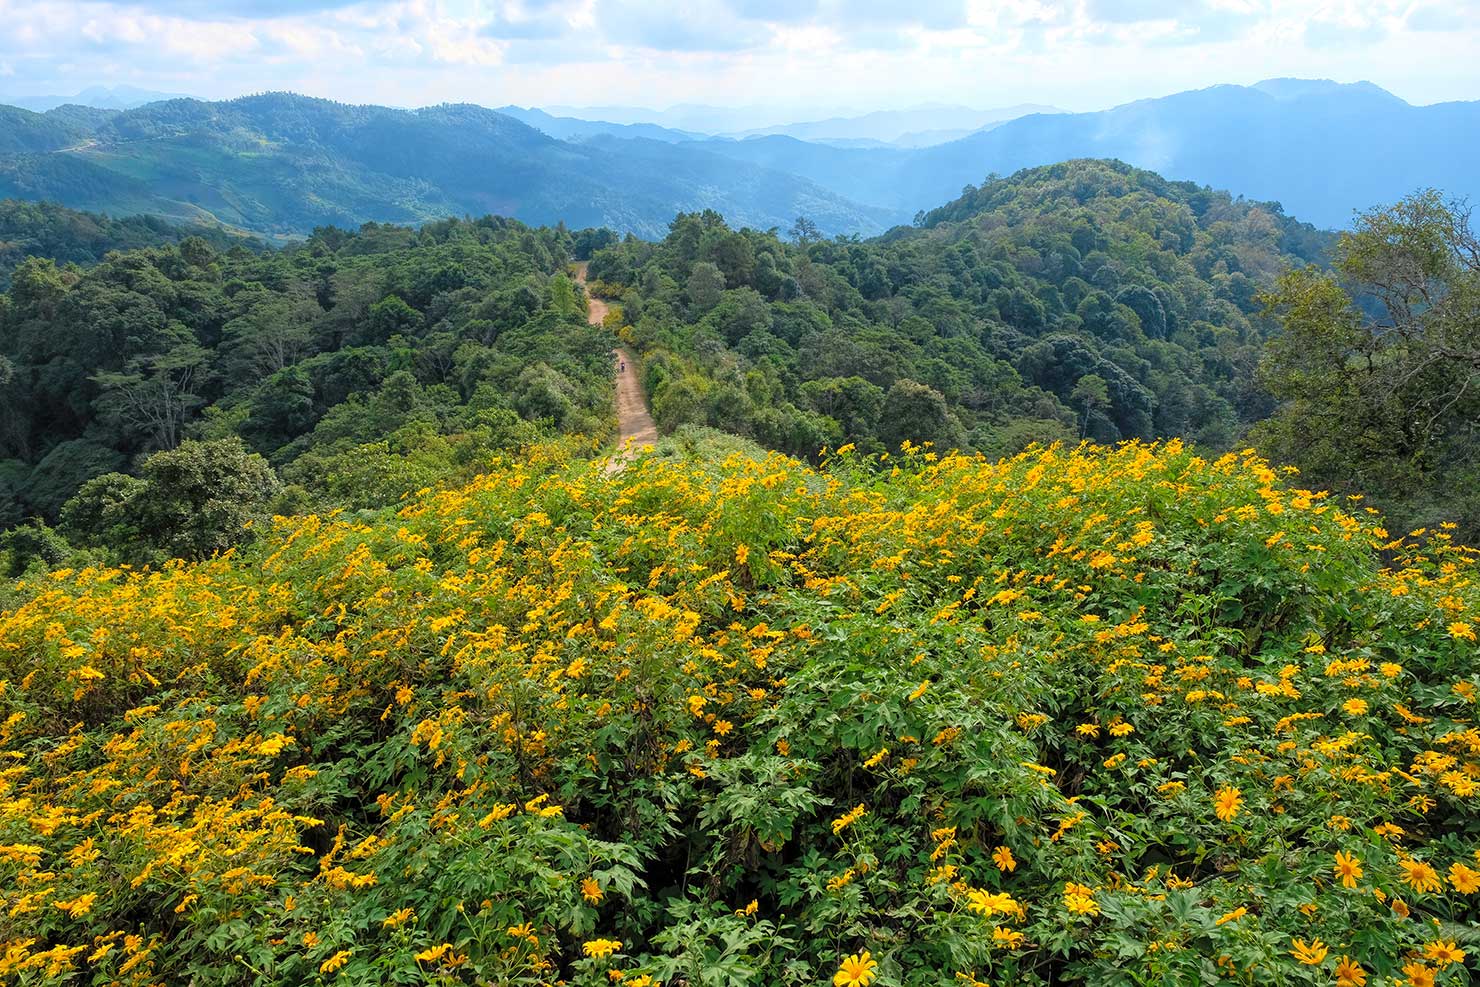 All roads lead to the sunflowers during the Bua Thong Flower Festival in Mae Hong Son Province